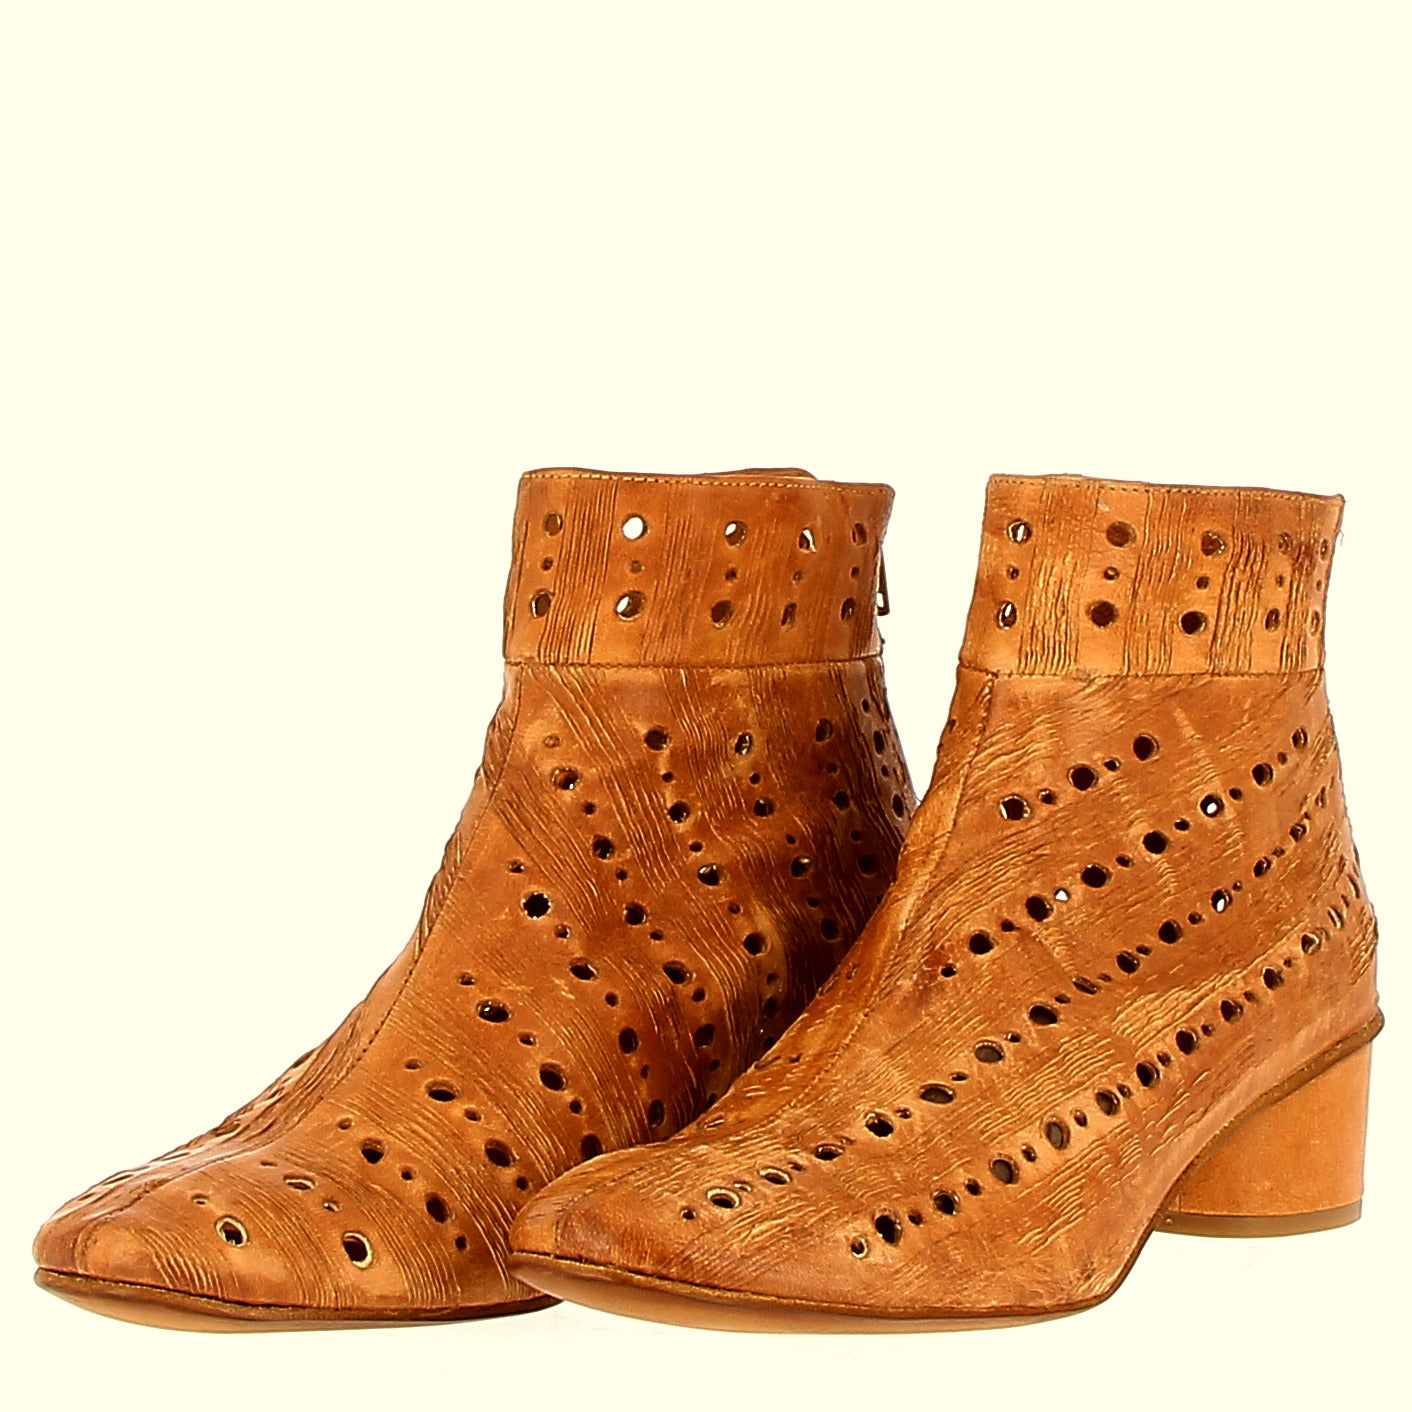 Supersoft ankle boot in natural perforated leather